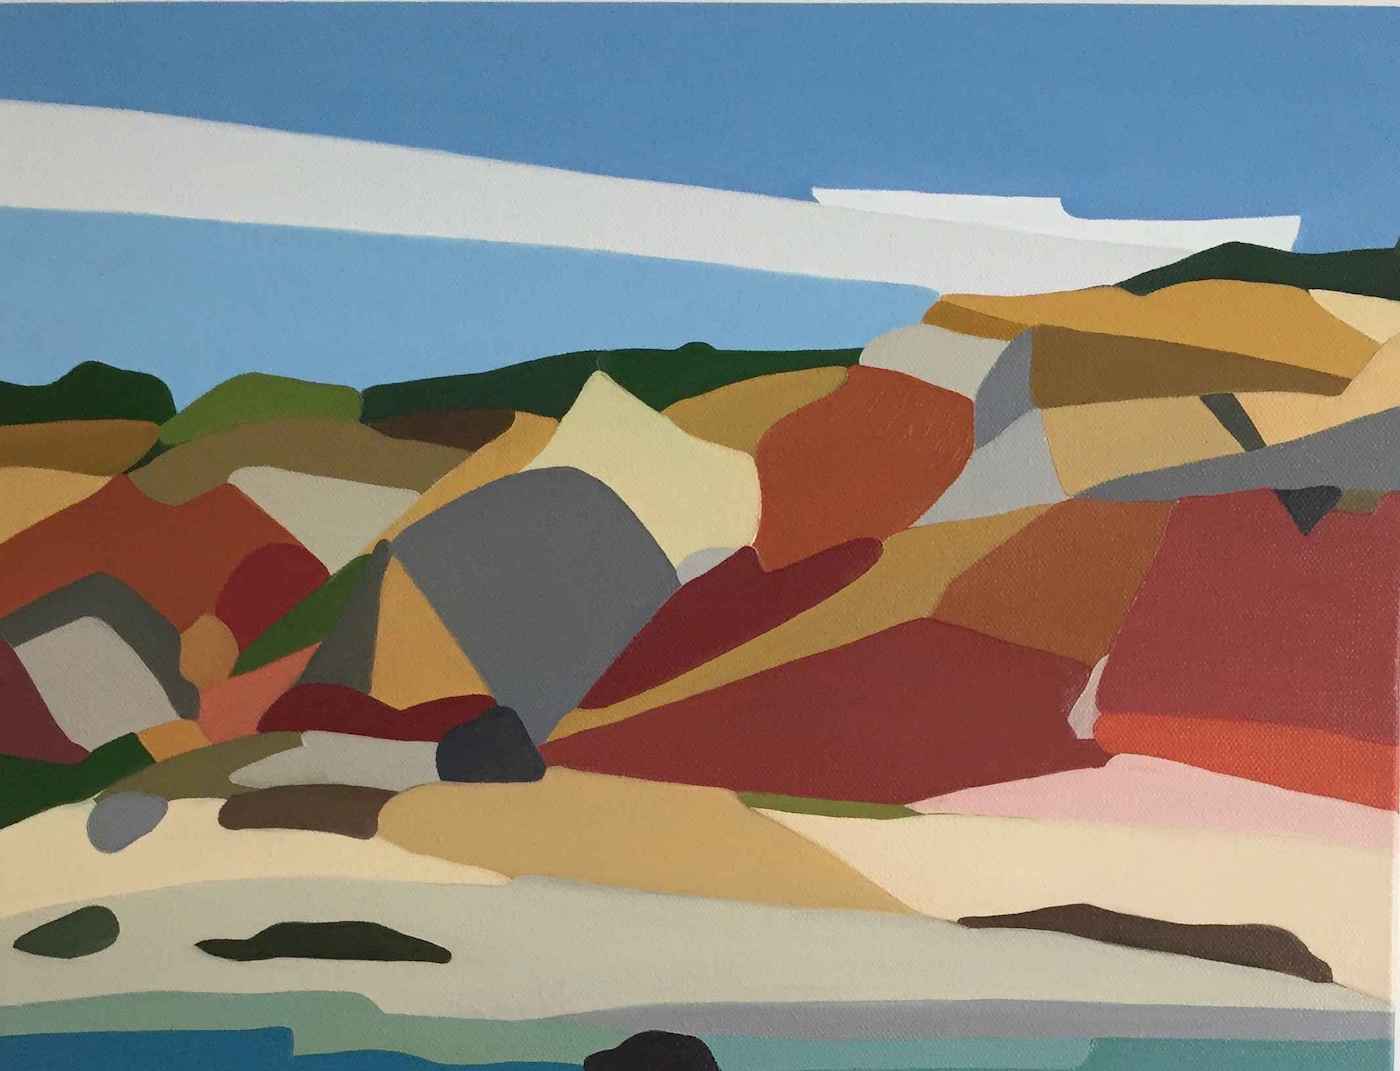 The Sandy Cliffs and Blue Skies of Martha’s Vineyard Abstracted into Paintings by Rachael Cassiani